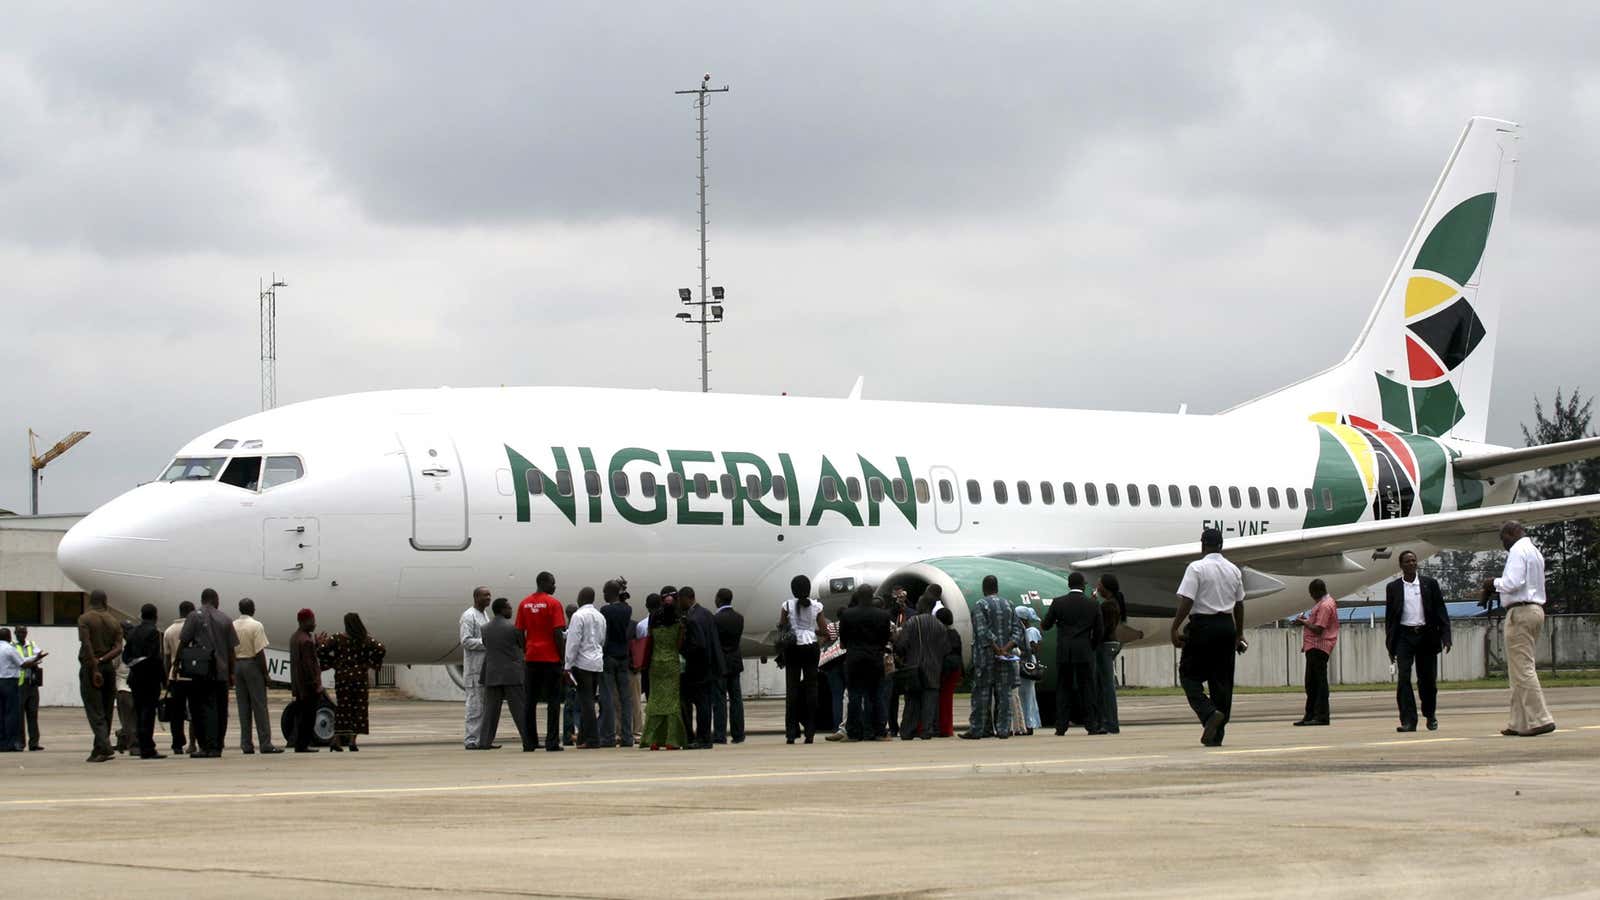 Uhh, no, that does not belong to Nigeria’s biggest airline.